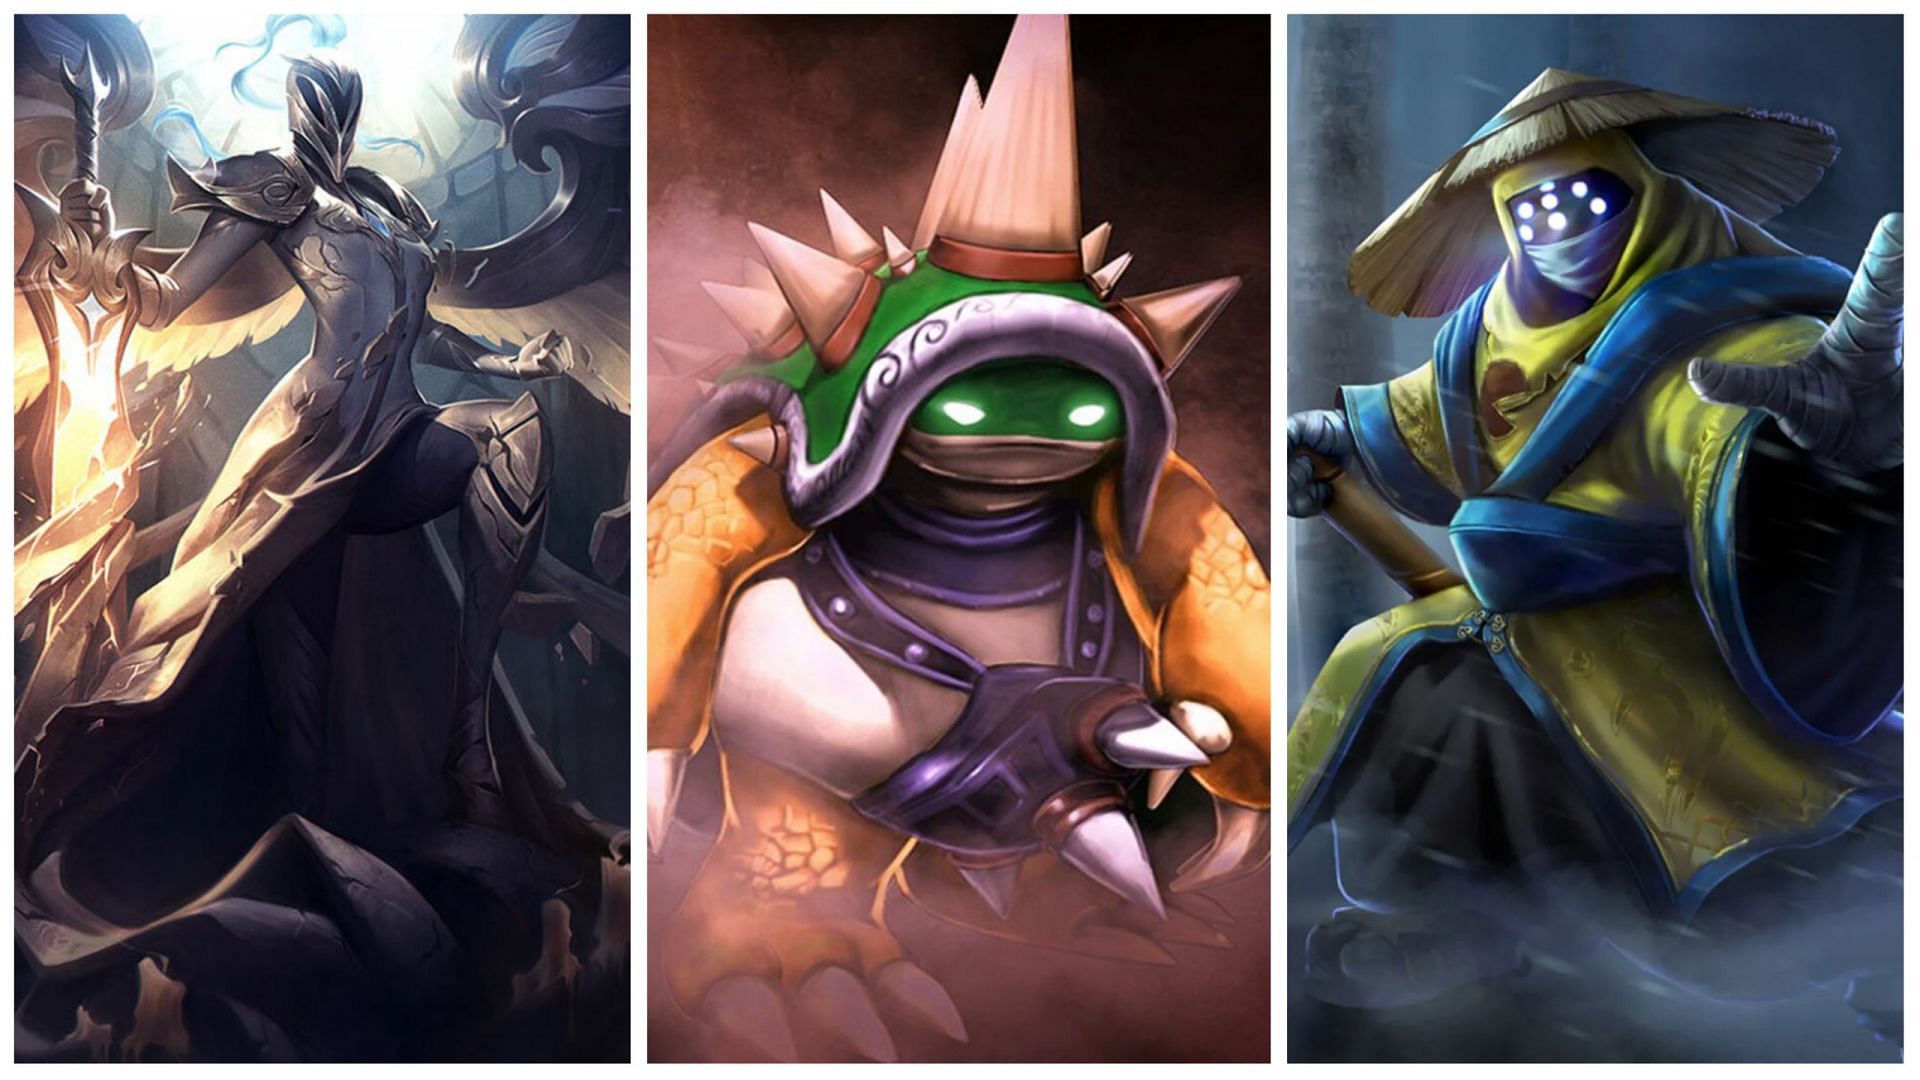 Top 7 League of Legends Skins in 2023